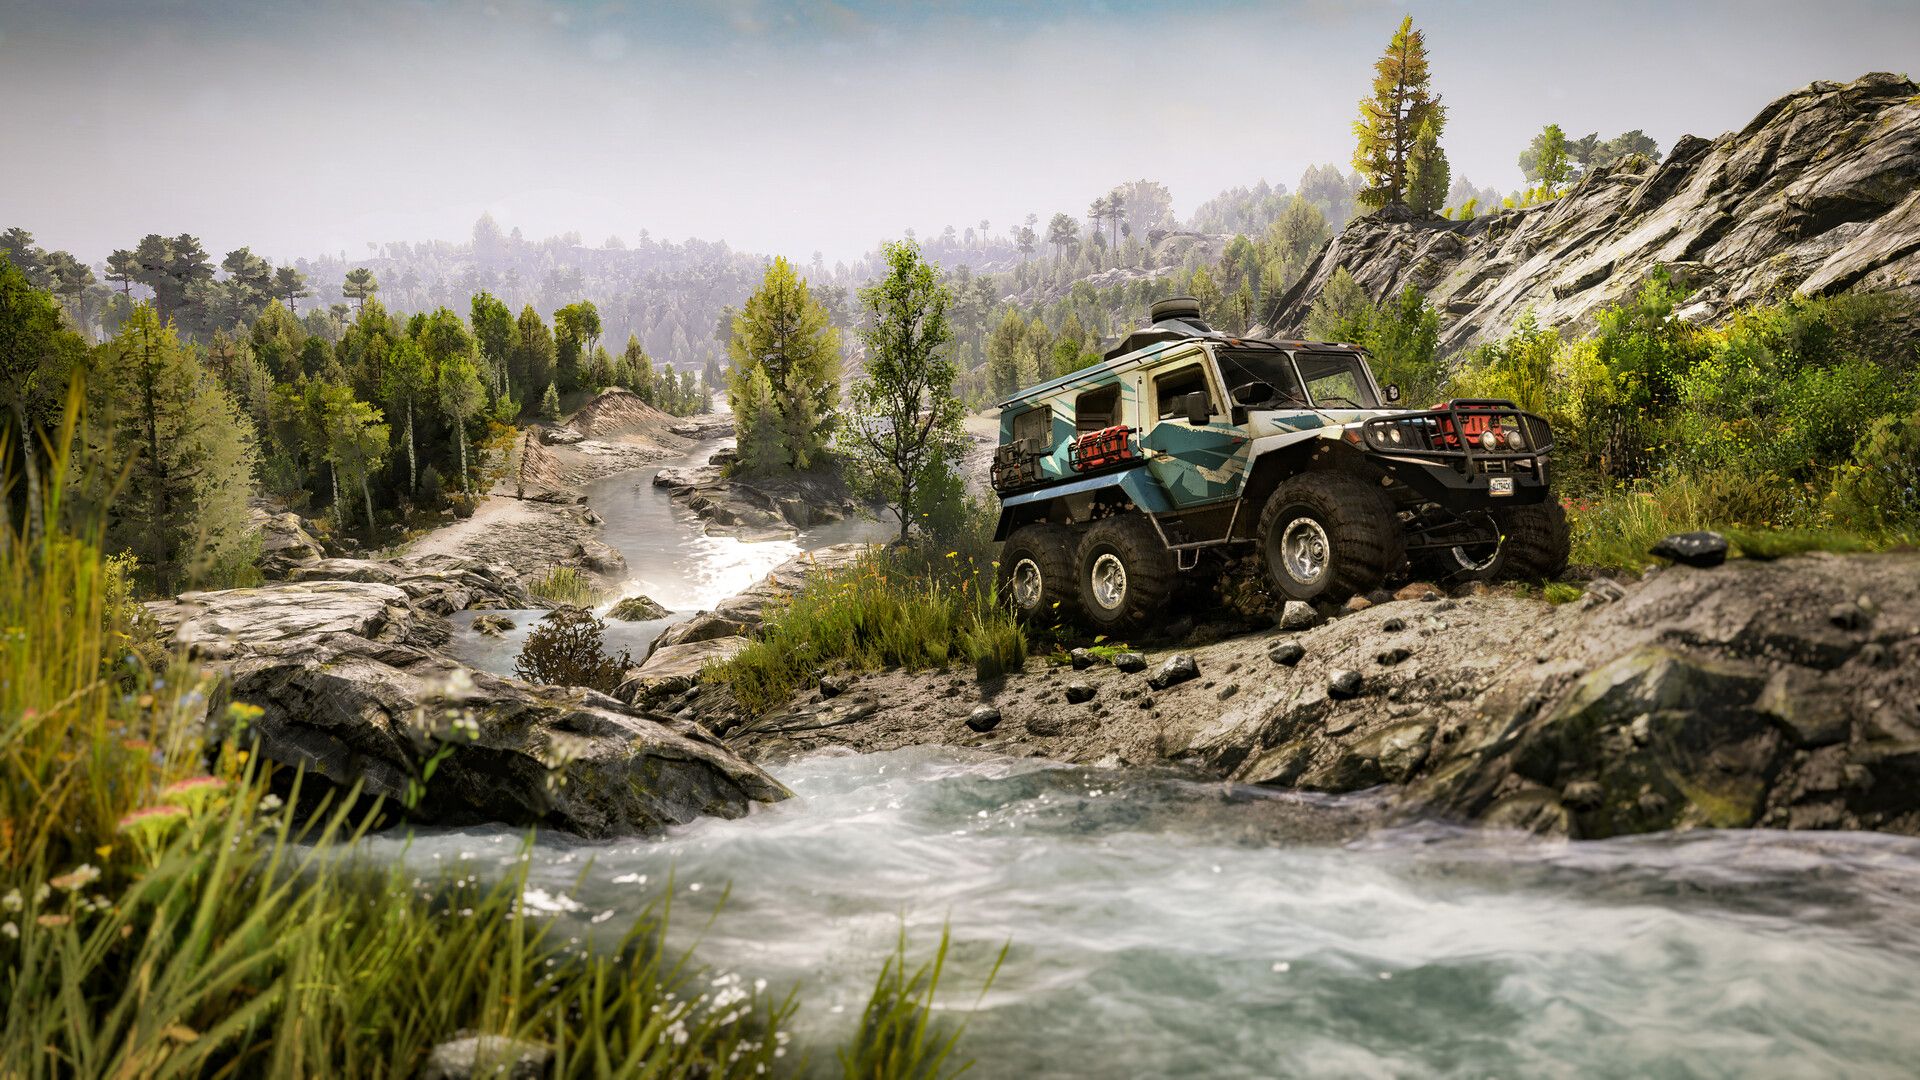 expeditions-a-mudrunner-game-pc-screenshot-4